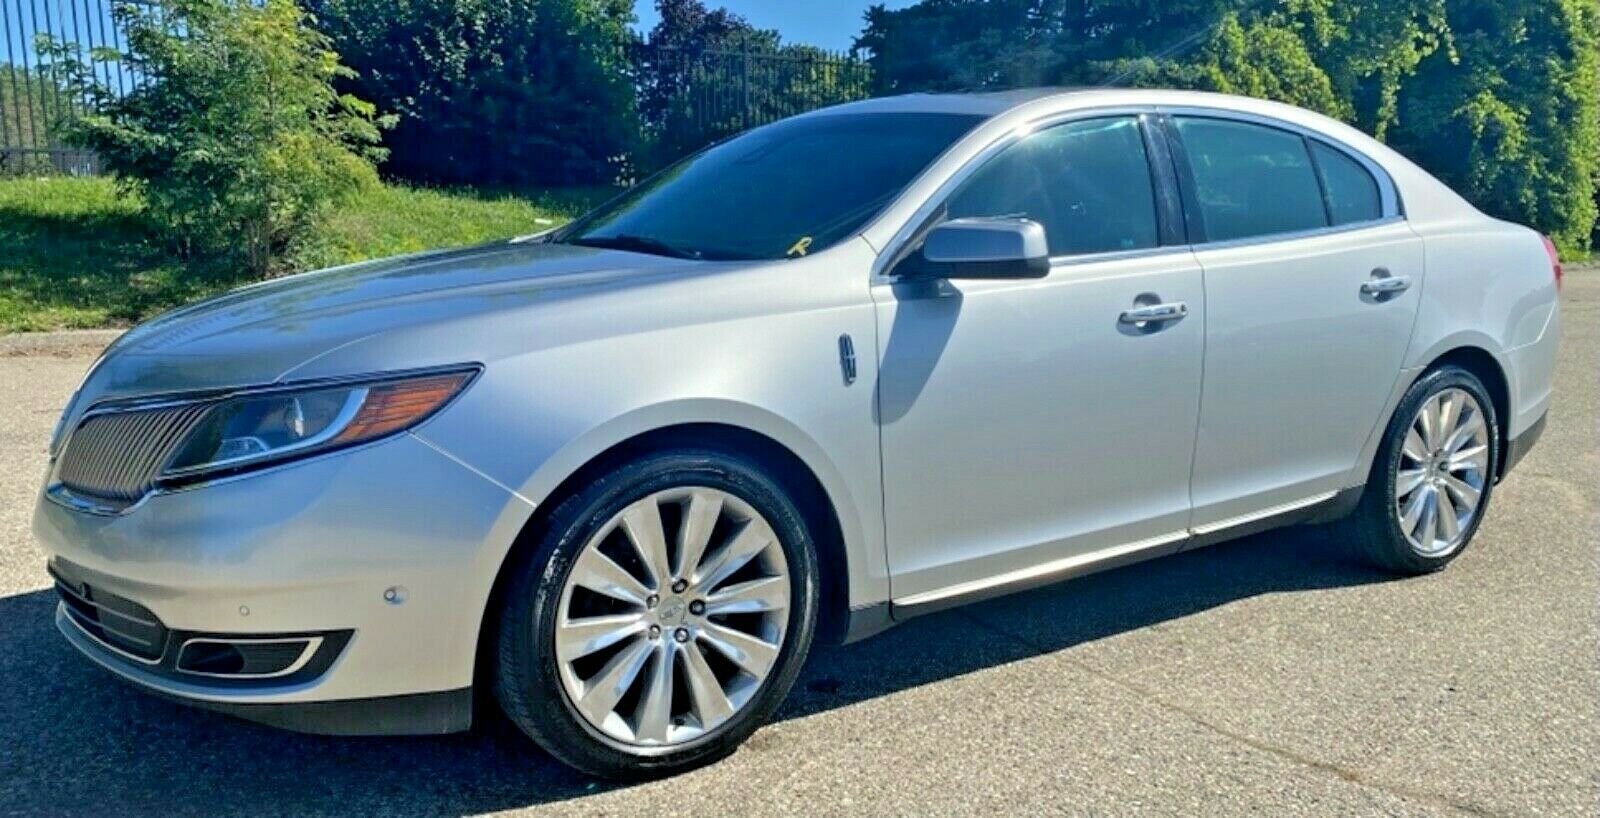 2013 Lincoln Mks Ecoboost 2013 Lincoln Mks Turbo Awd 50k Miles Nav,camera,heat/cool Seat,roof. Loaded